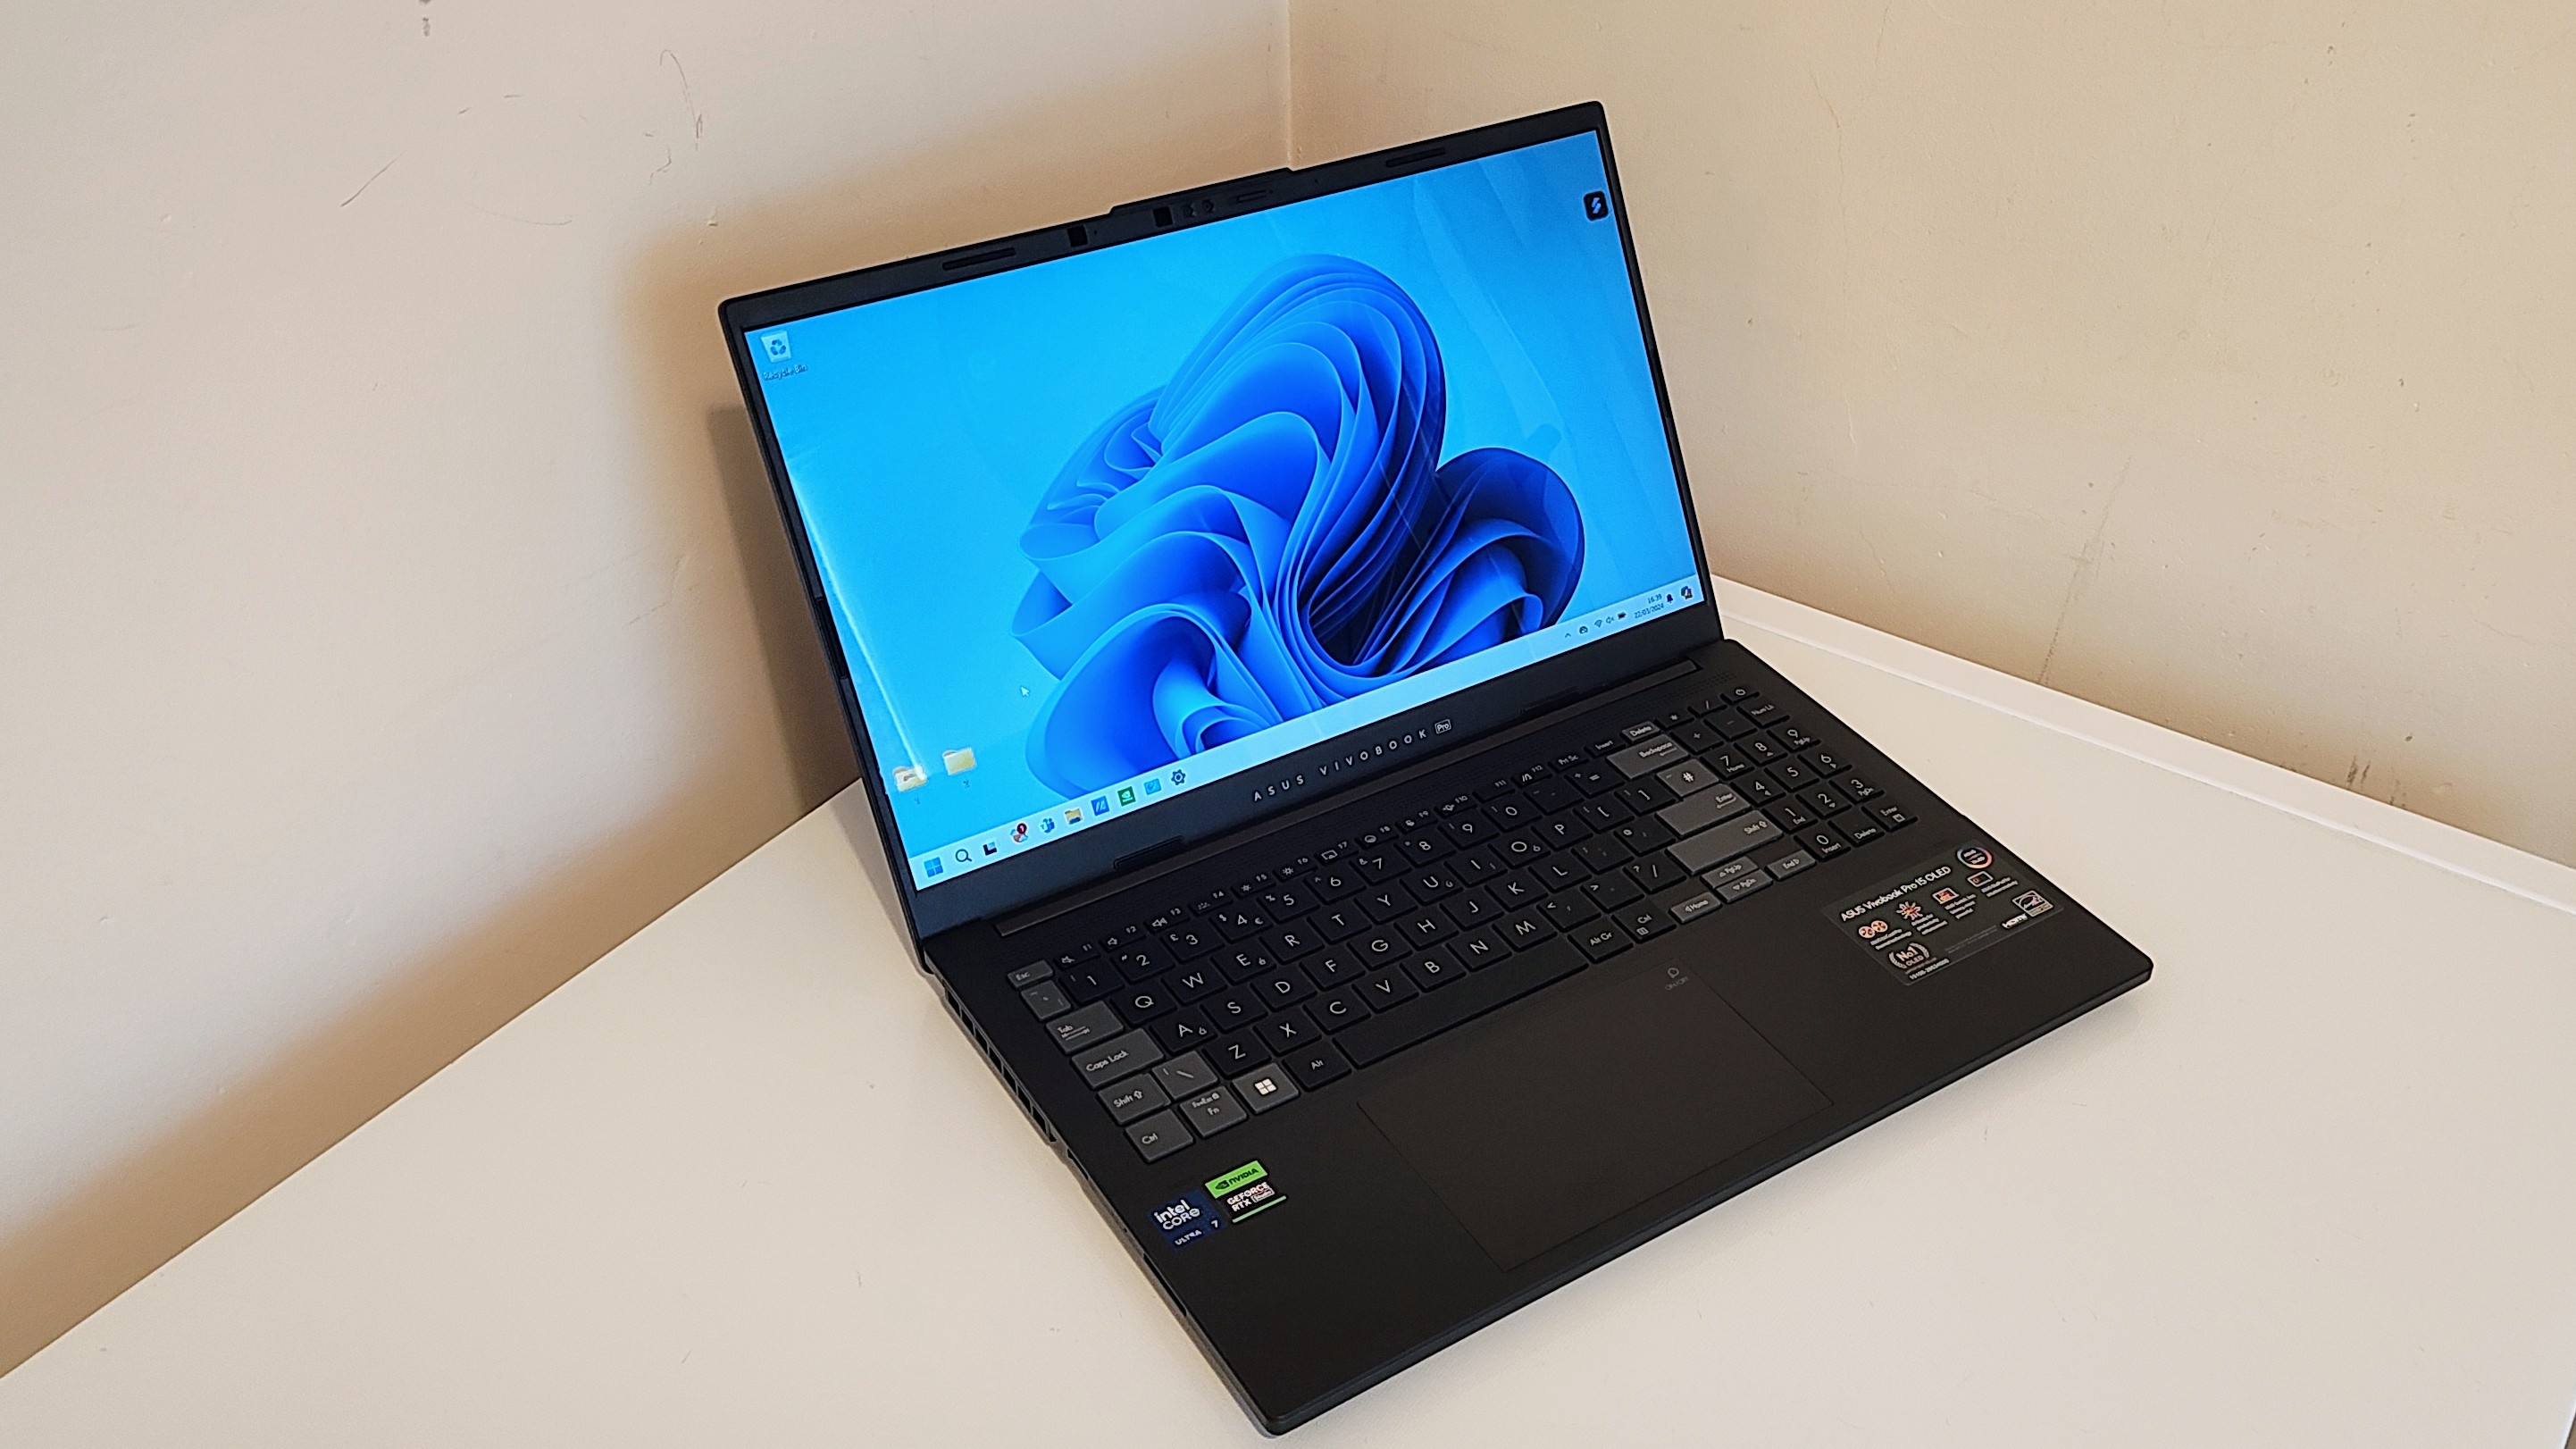 The Asus Vivobook Pro 15 on the ITPro background